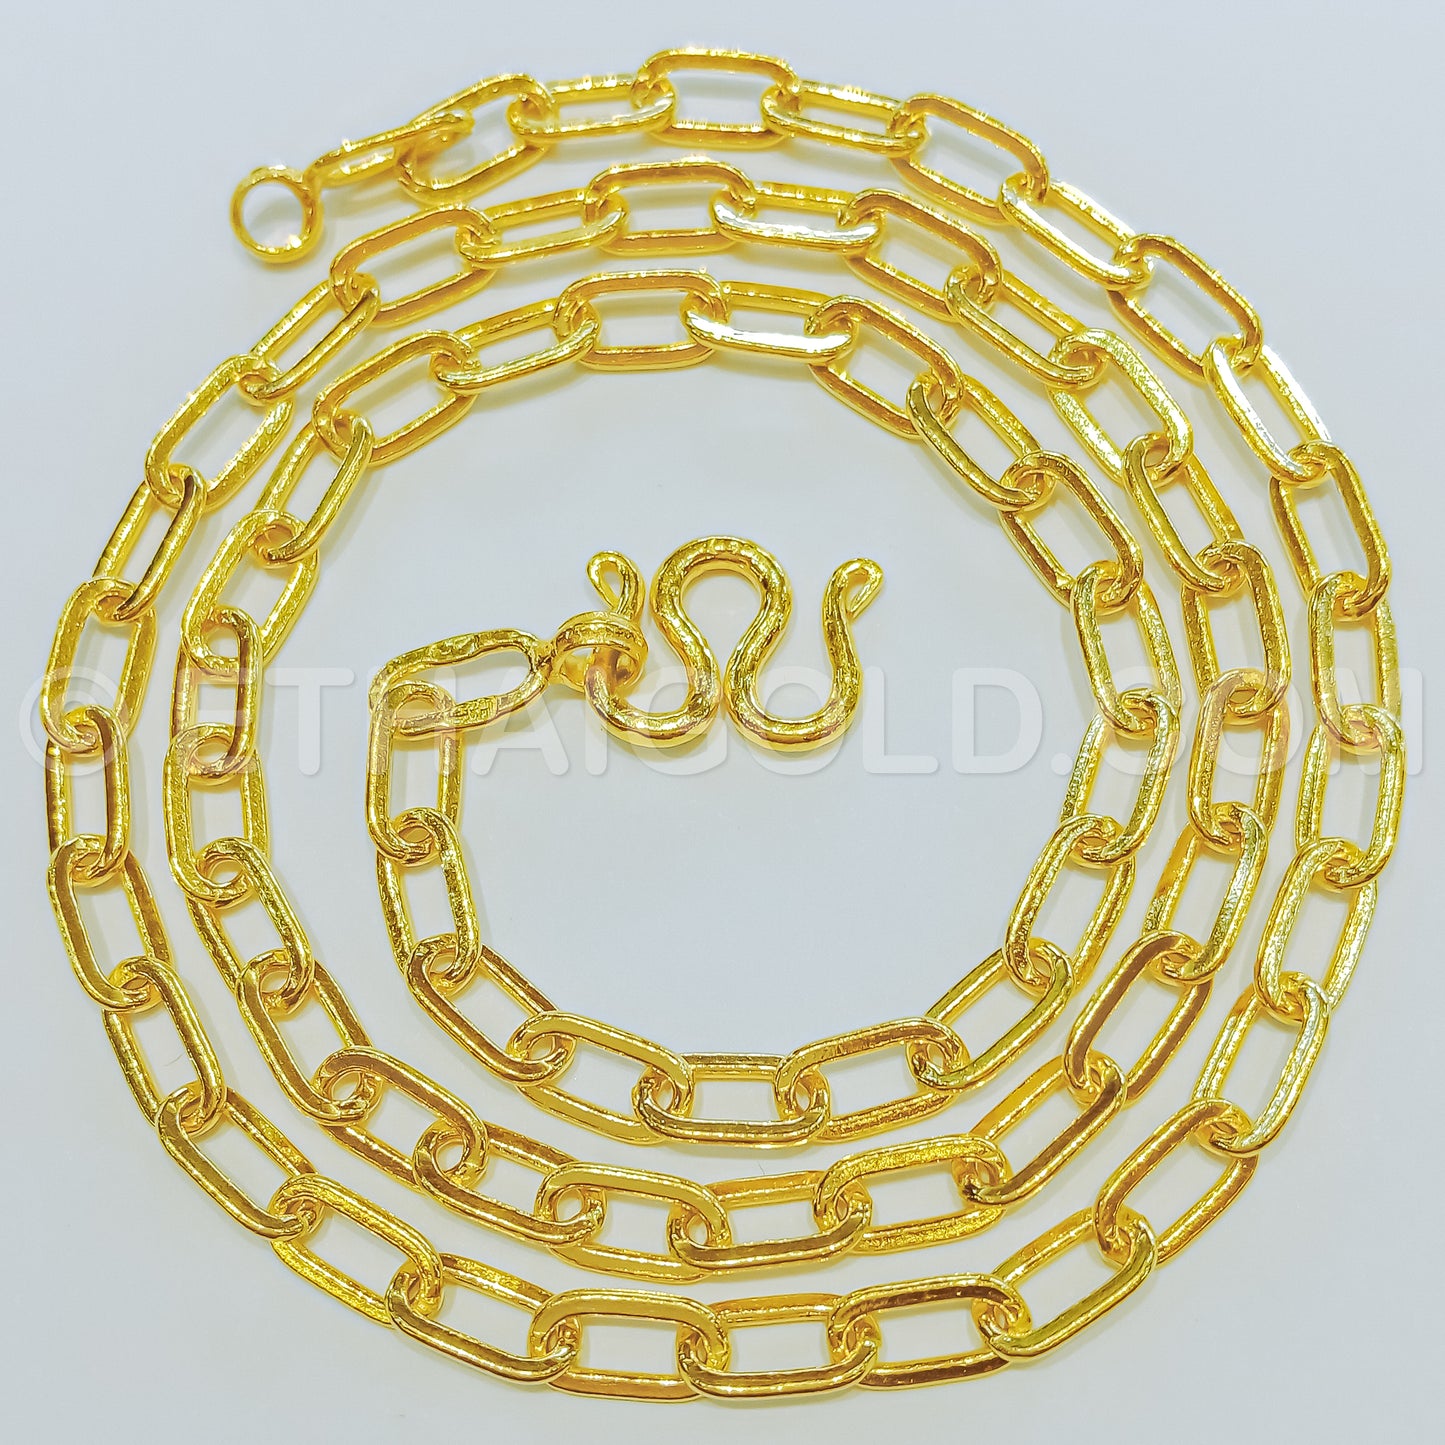 2 BAHT POLISHED SOLID LONG FLAT CABLE CHAIN NECKLACE IN 23K GOLD (ID: N0102B)